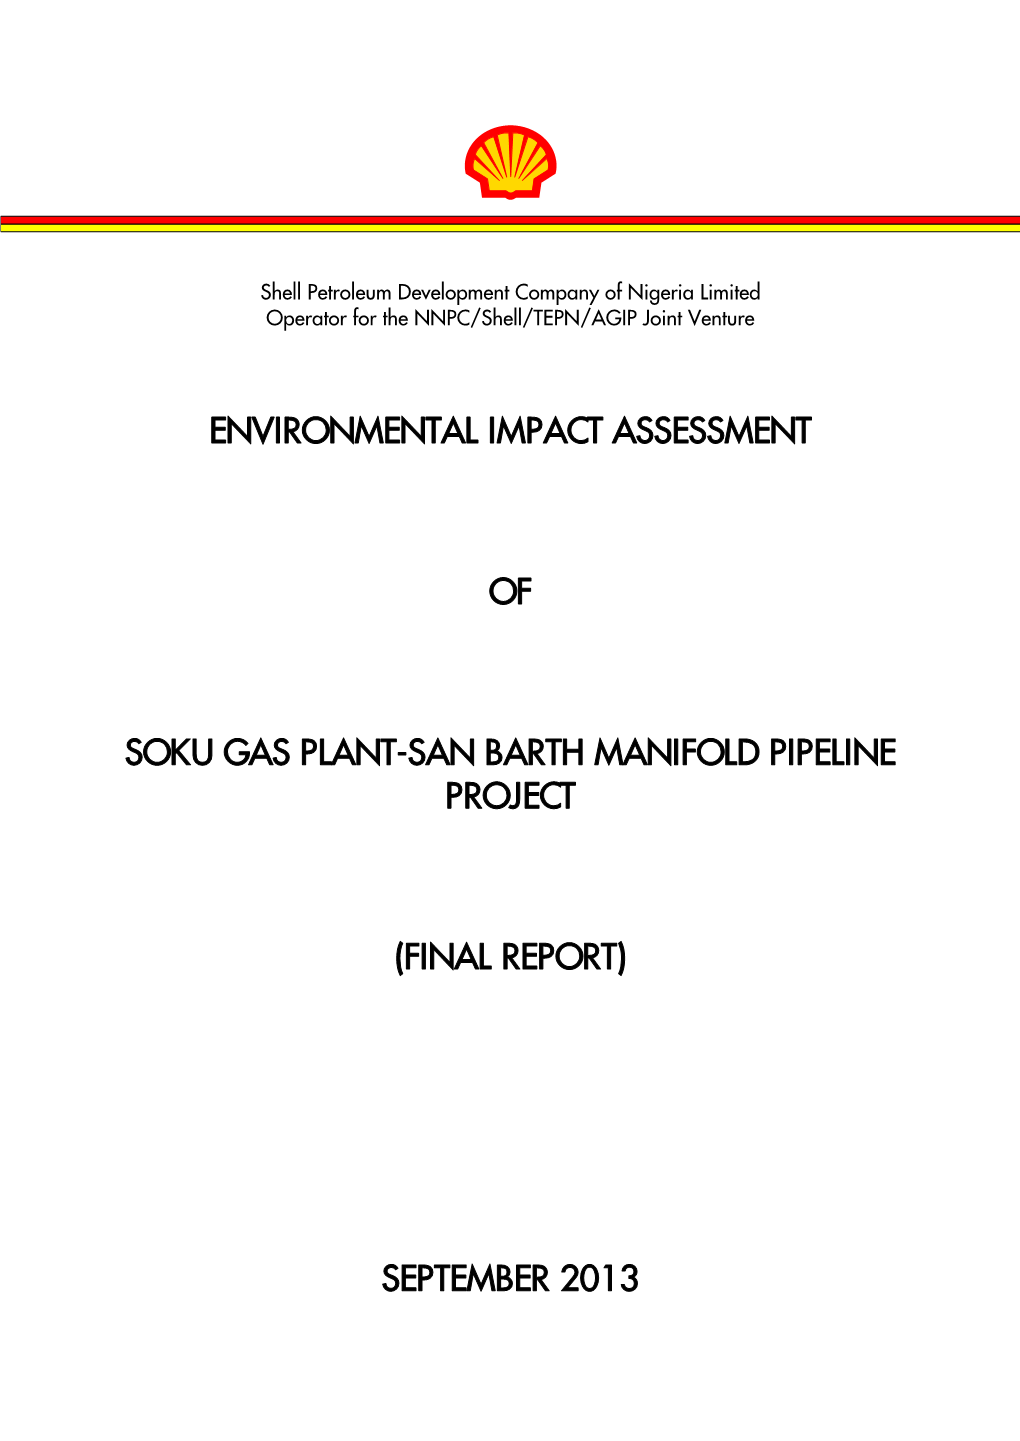 Environmental Impact Assessment of Soku Gas Plant-San Barth Manifold Pipeline Project (Final Report) September 2013